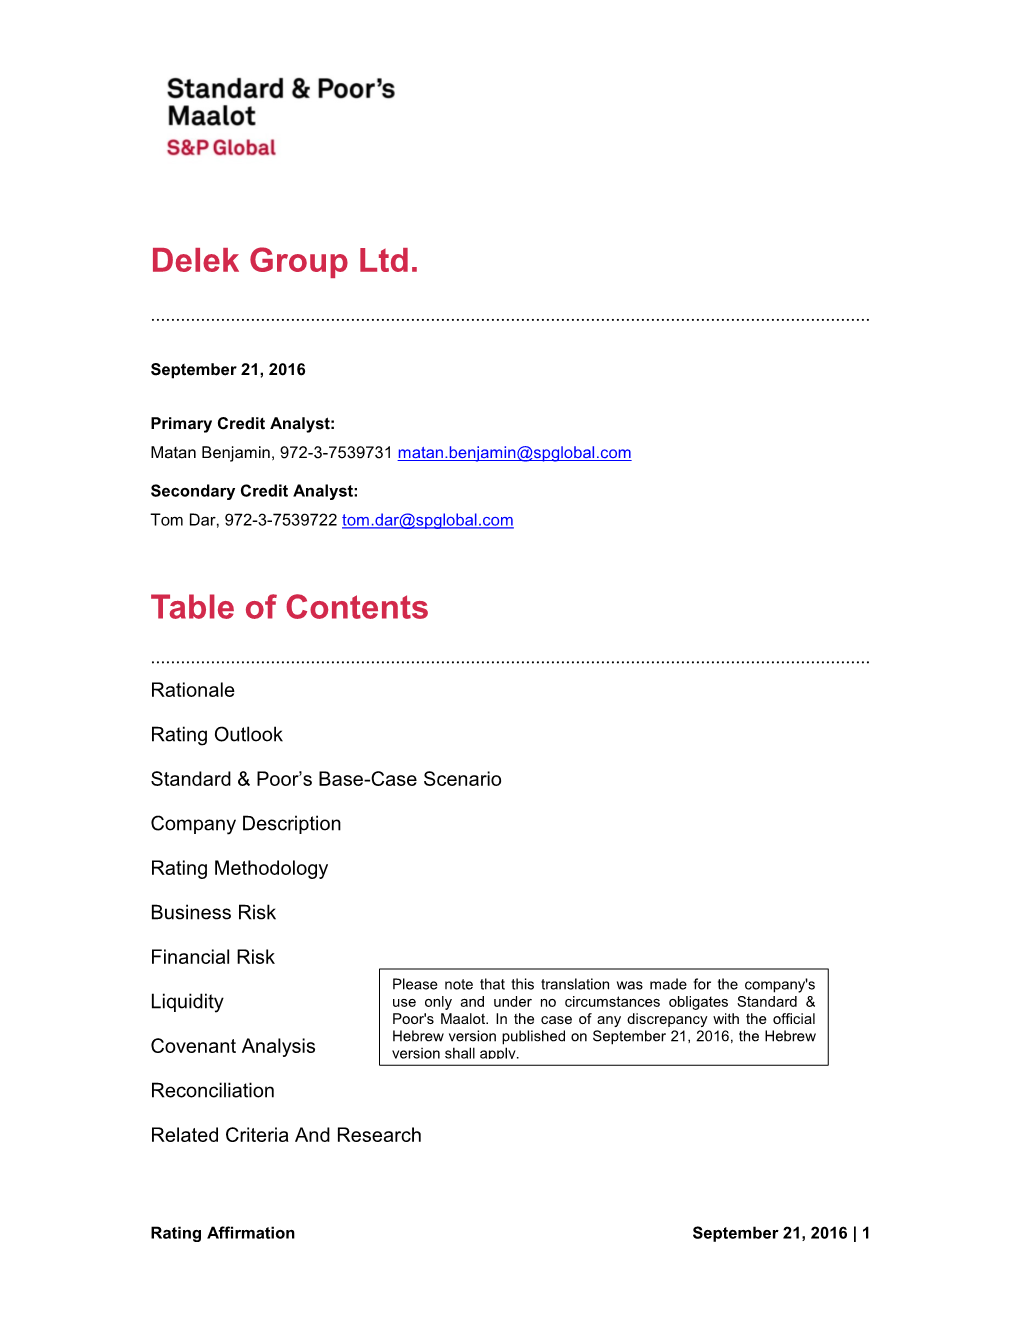 Delek Group Ltd. Table of Contents